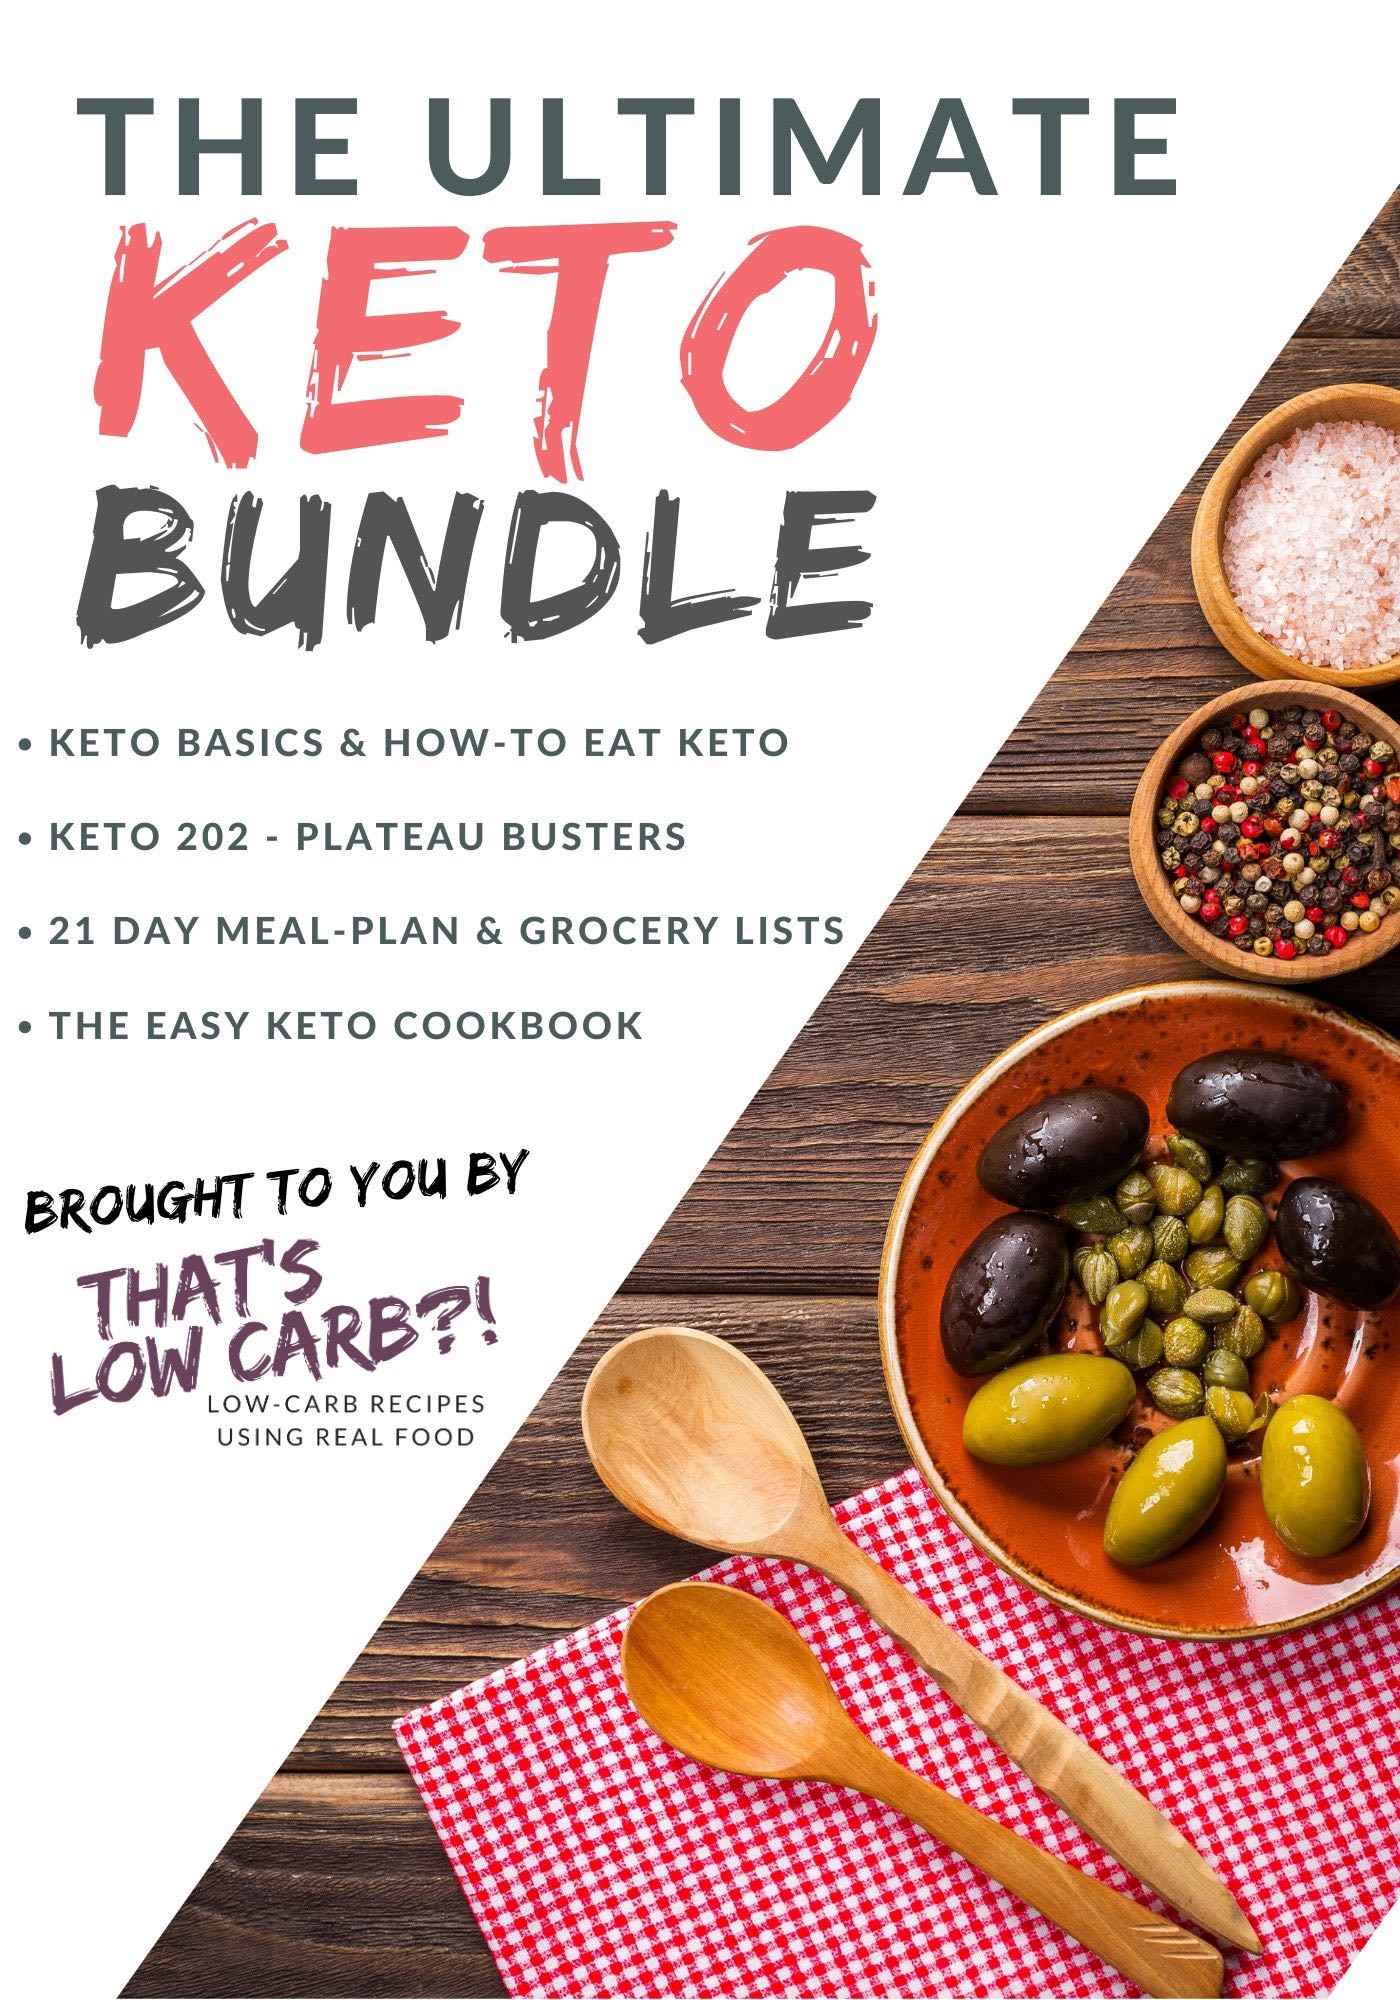 Image of cover of "The Ultimate Keto Bundle".